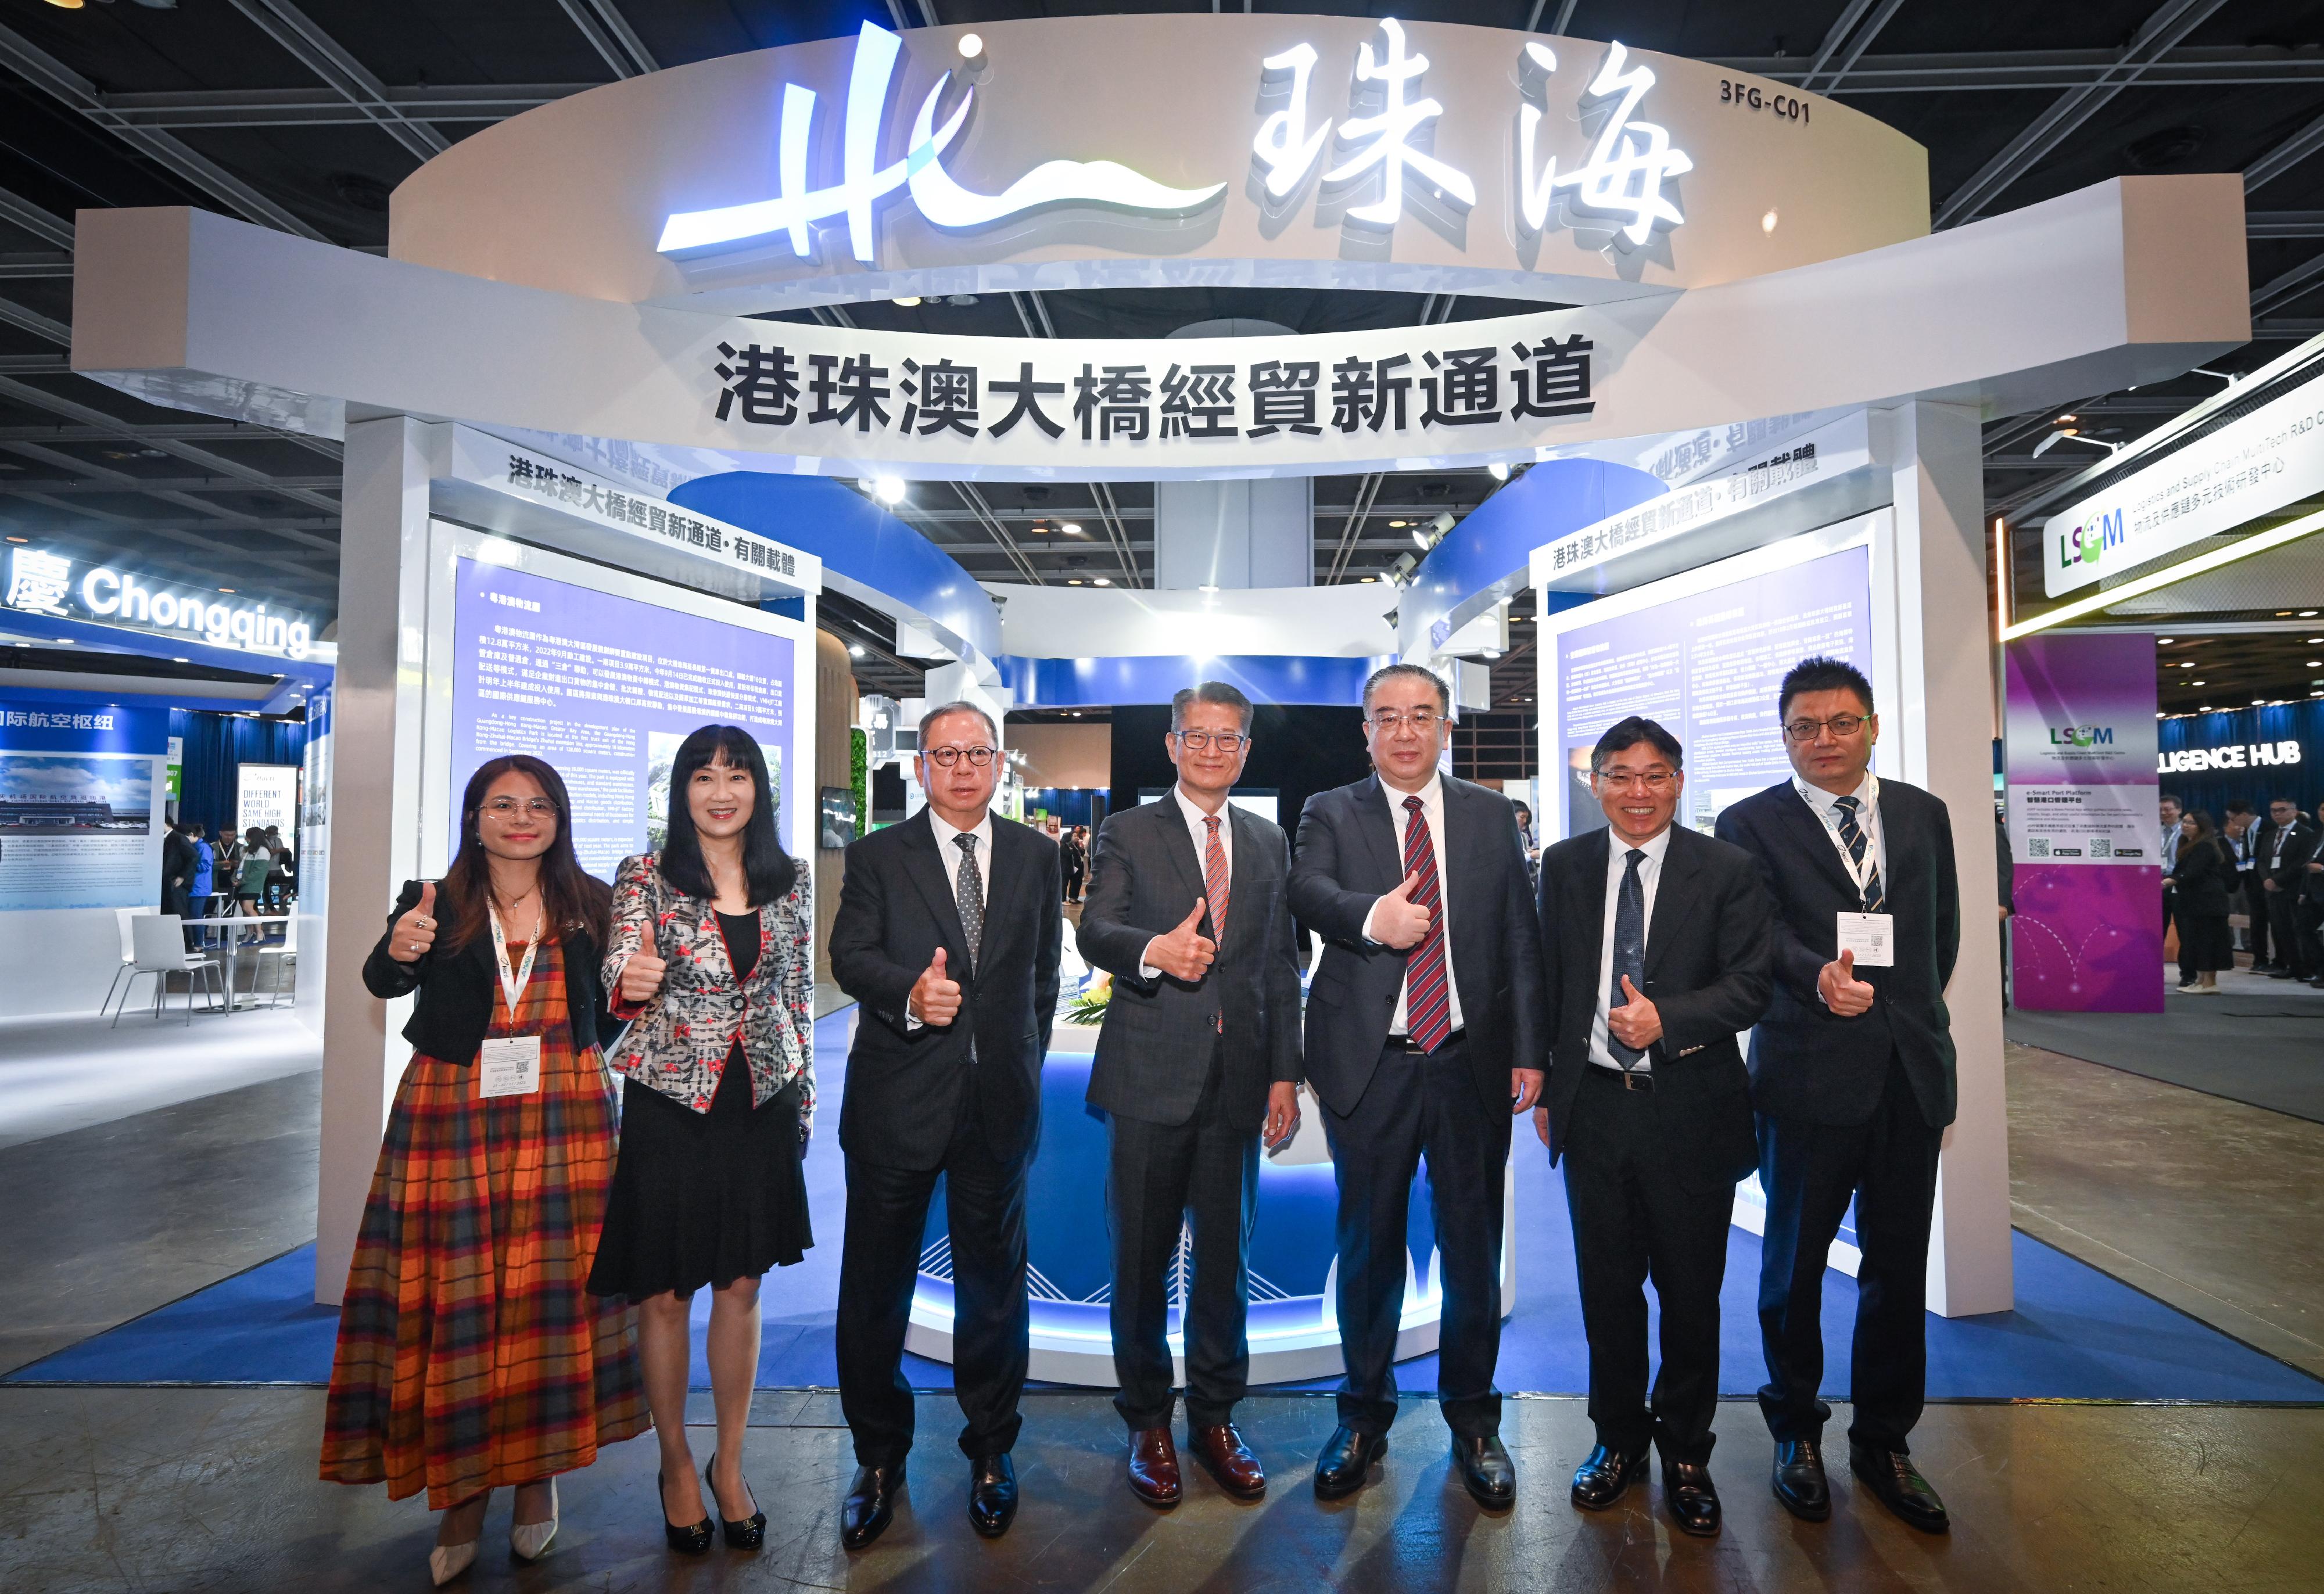 The Financial Secretary, Mr Paul Chan, attended the Asian Logistics, Maritime and Aviation Conference 2023 and toured the exhibition today (November 21). Photo shows (from second left) the Executive Director of the Hong Kong Trade Development Council (HKTDC), Ms Margaret Fong; the Chairman of the HKTDC, Dr Peter Lam; Mr Chan; Vice Minister of Transport Mr Fu Xuyin; the Secretary for Transport and Logistics, Mr Lam Sai-hung, and other guests at the exhibition.